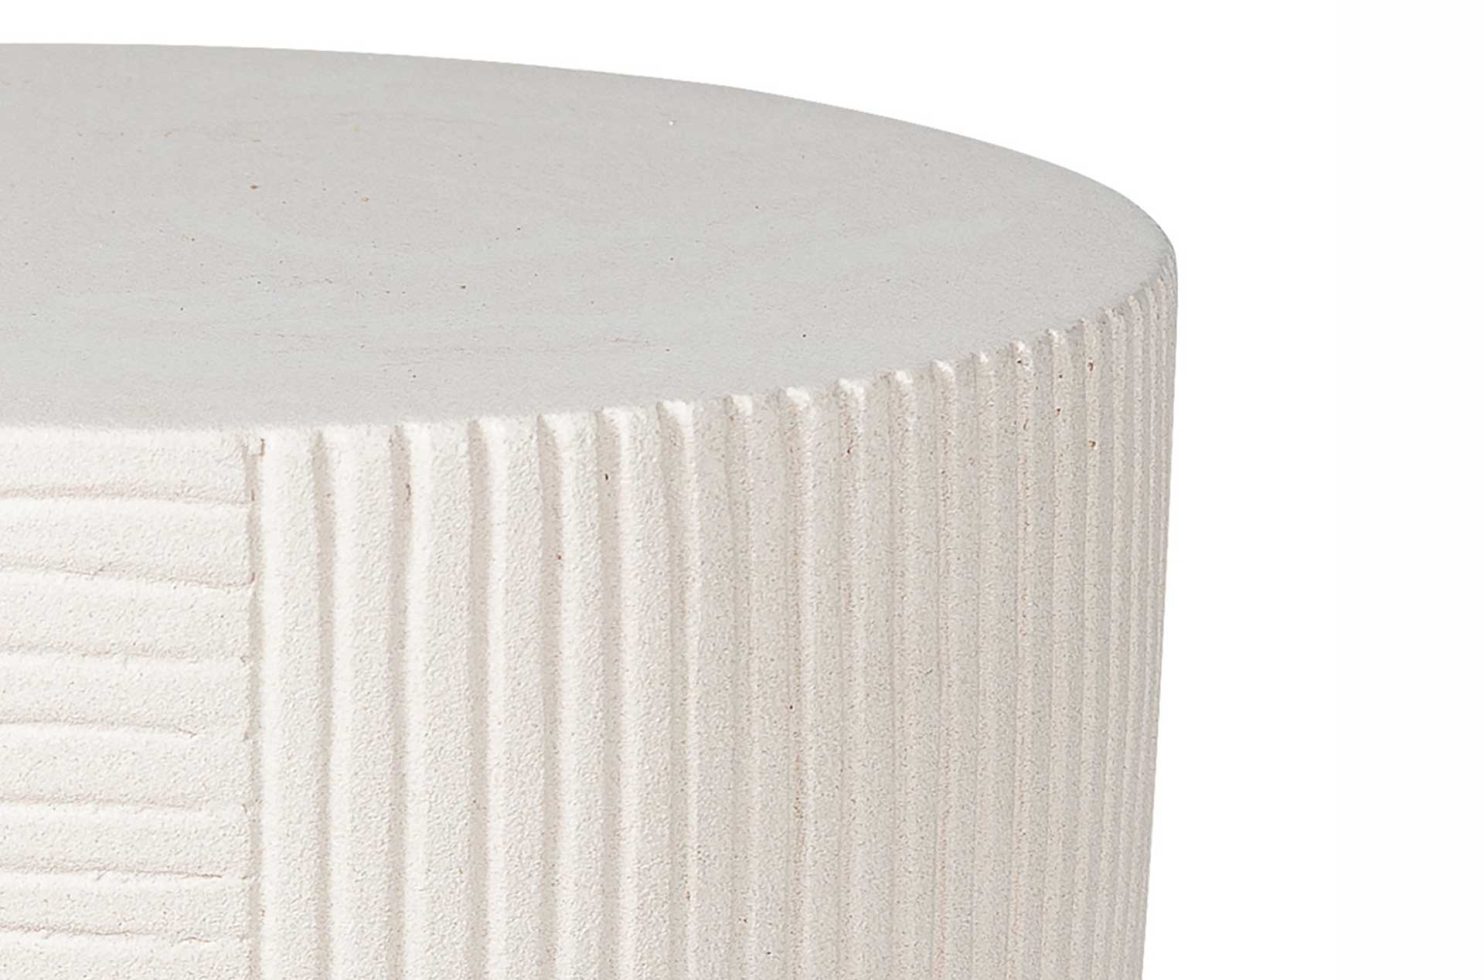 prov cer serenity textured side table 16in C30802035 sand dtl2 2500